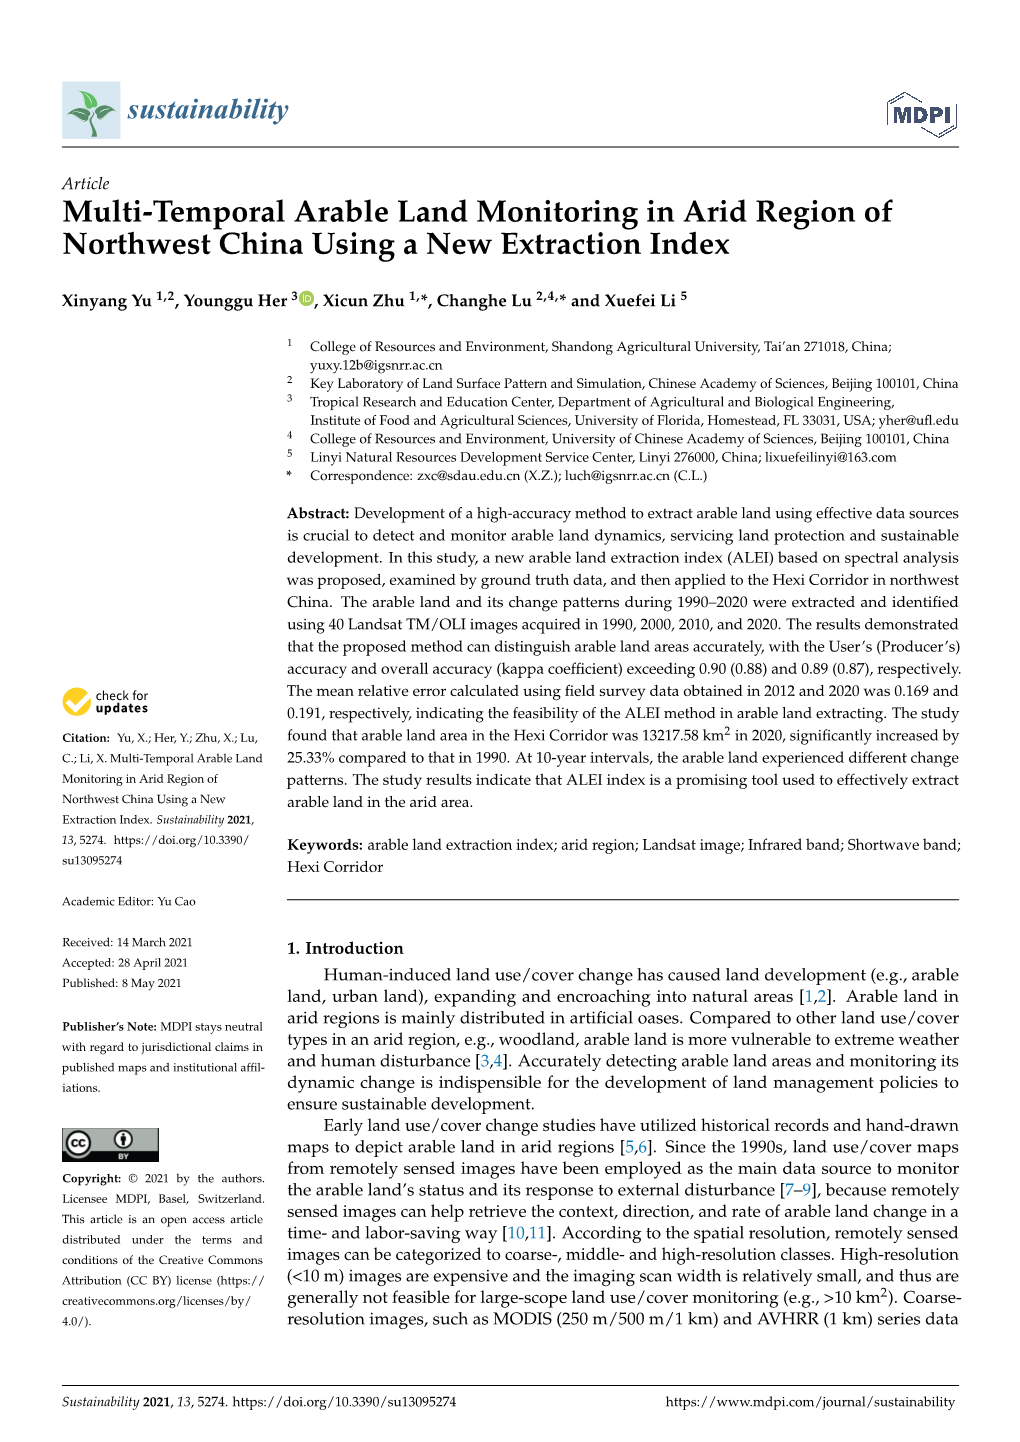 Multi-Temporal Arable Land Monitoring in Arid Region of Northwest China Using a New Extraction Index